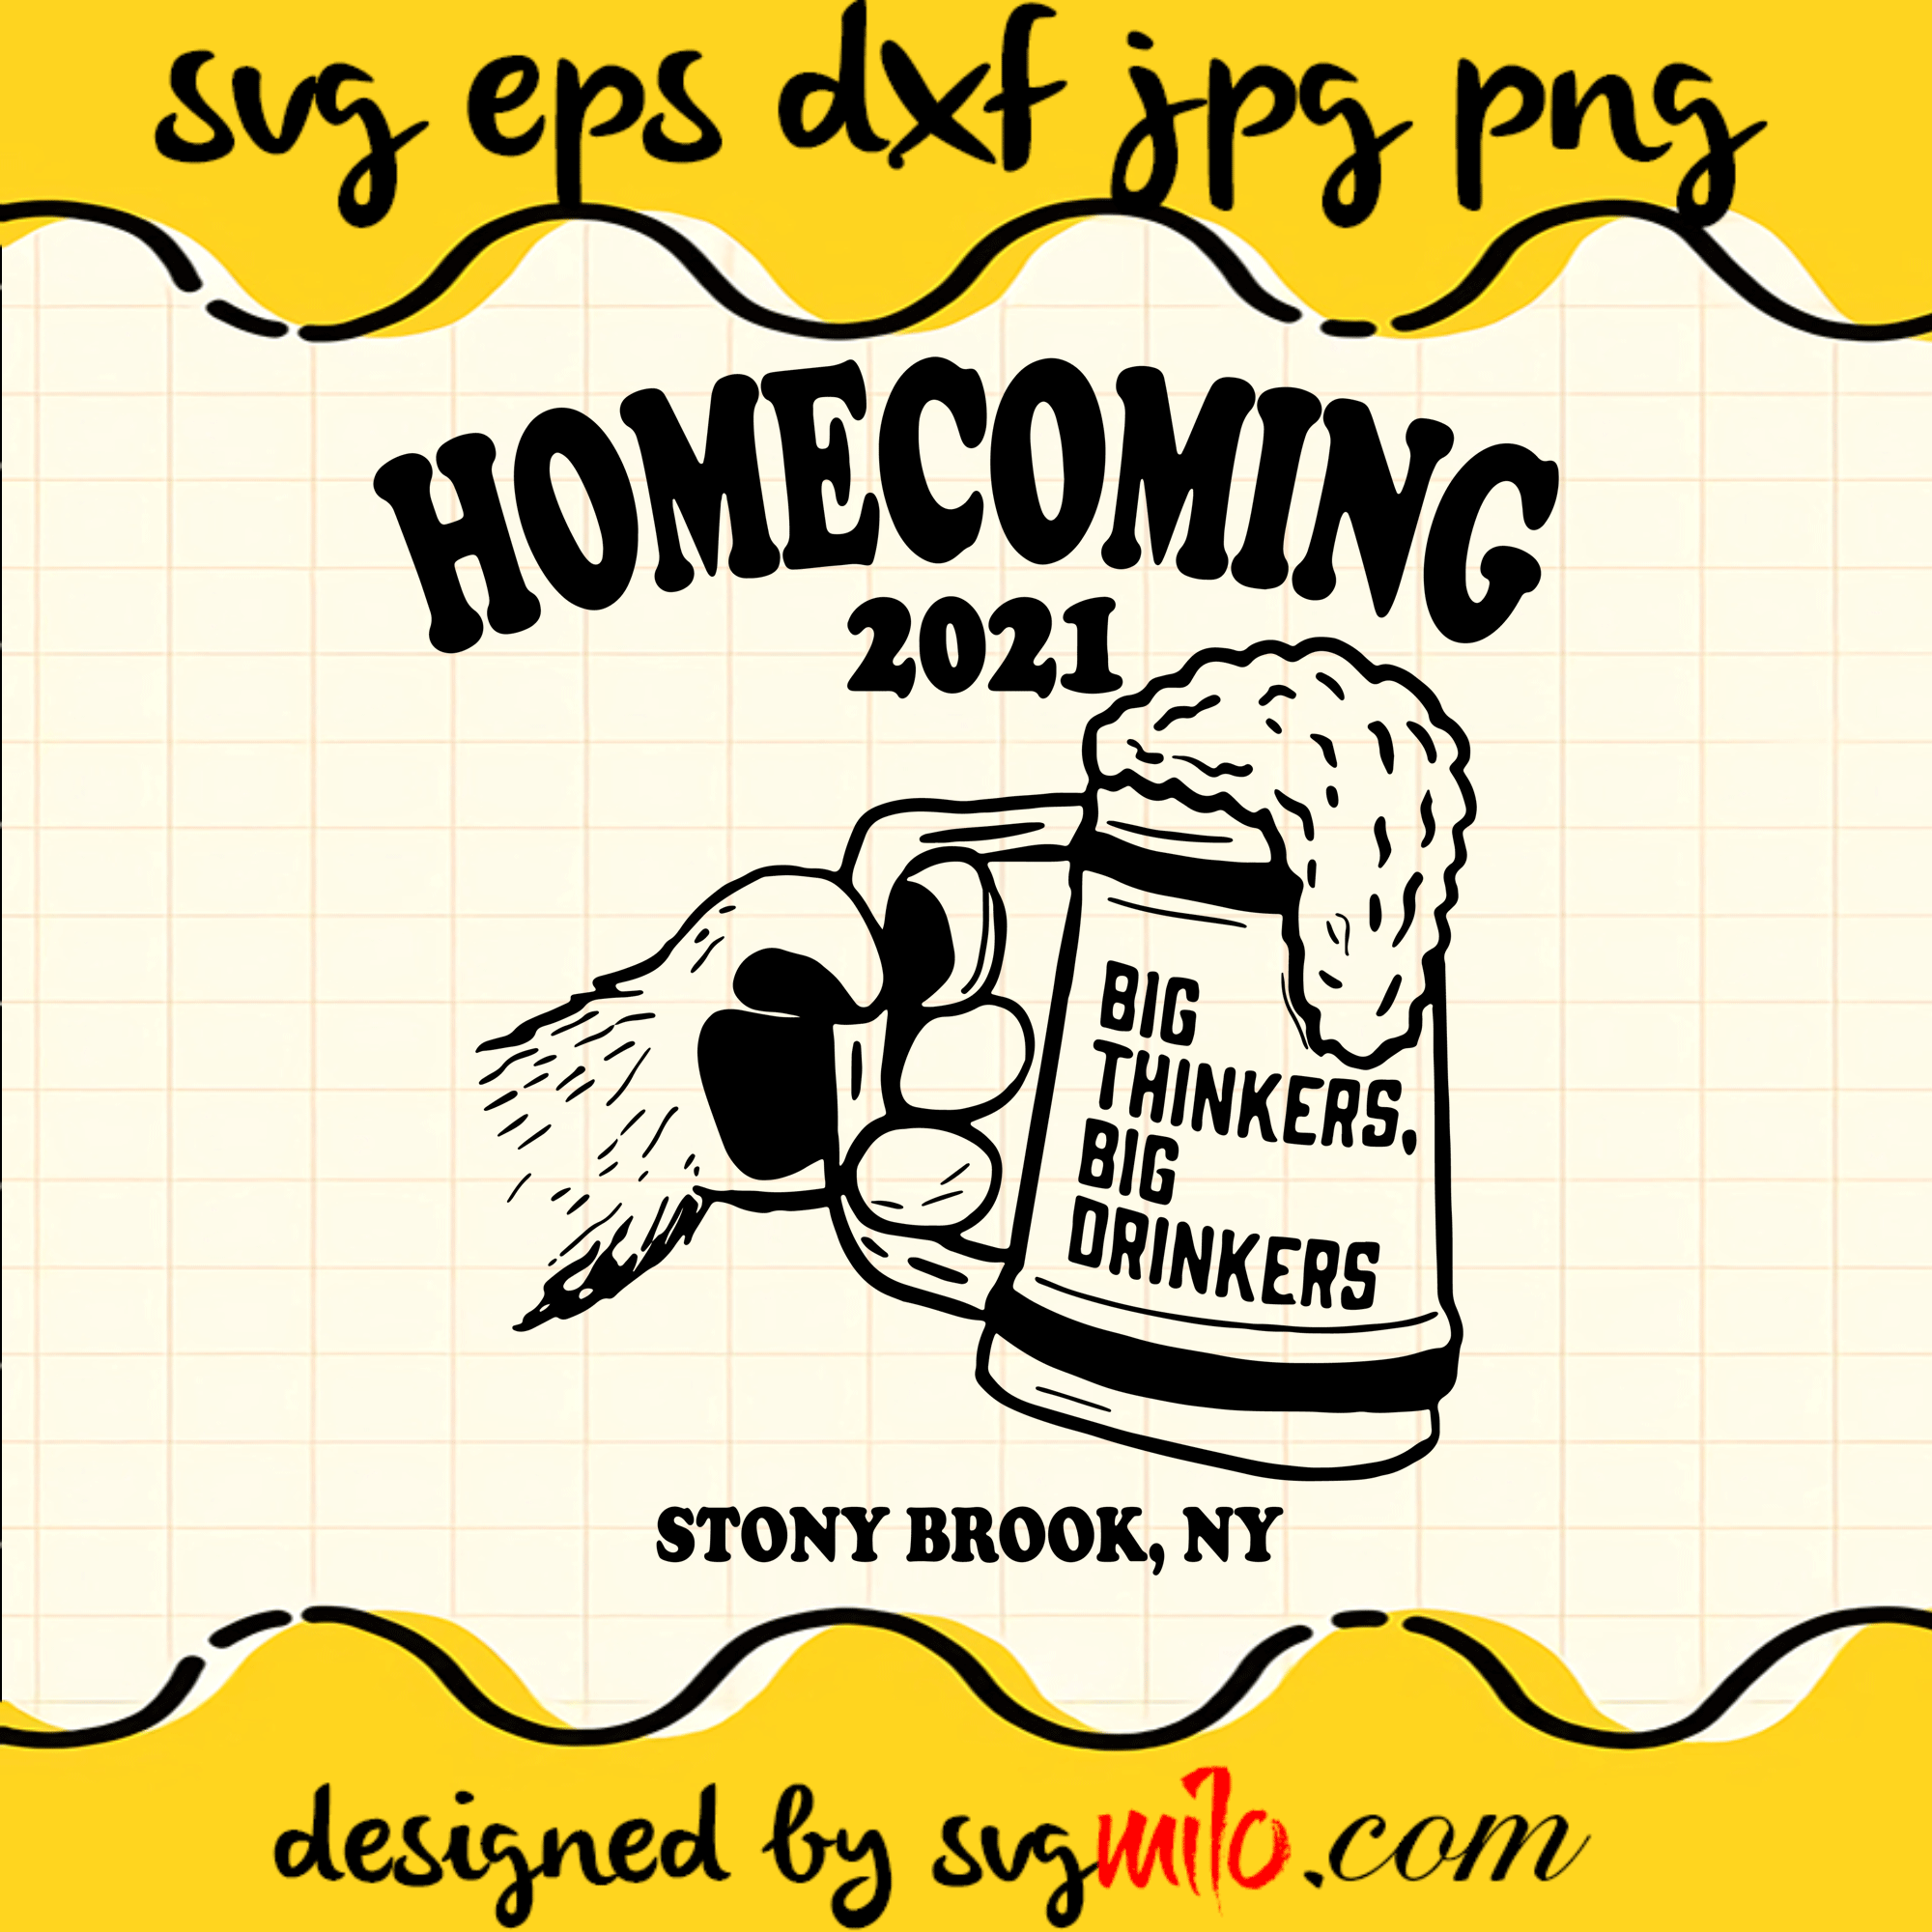 Home Coming 2021 Big Thinkers, Big Drinkers Stony Brook, Ny SVG, EPS, PNG, DXF, Premium Quality - SVGMILO